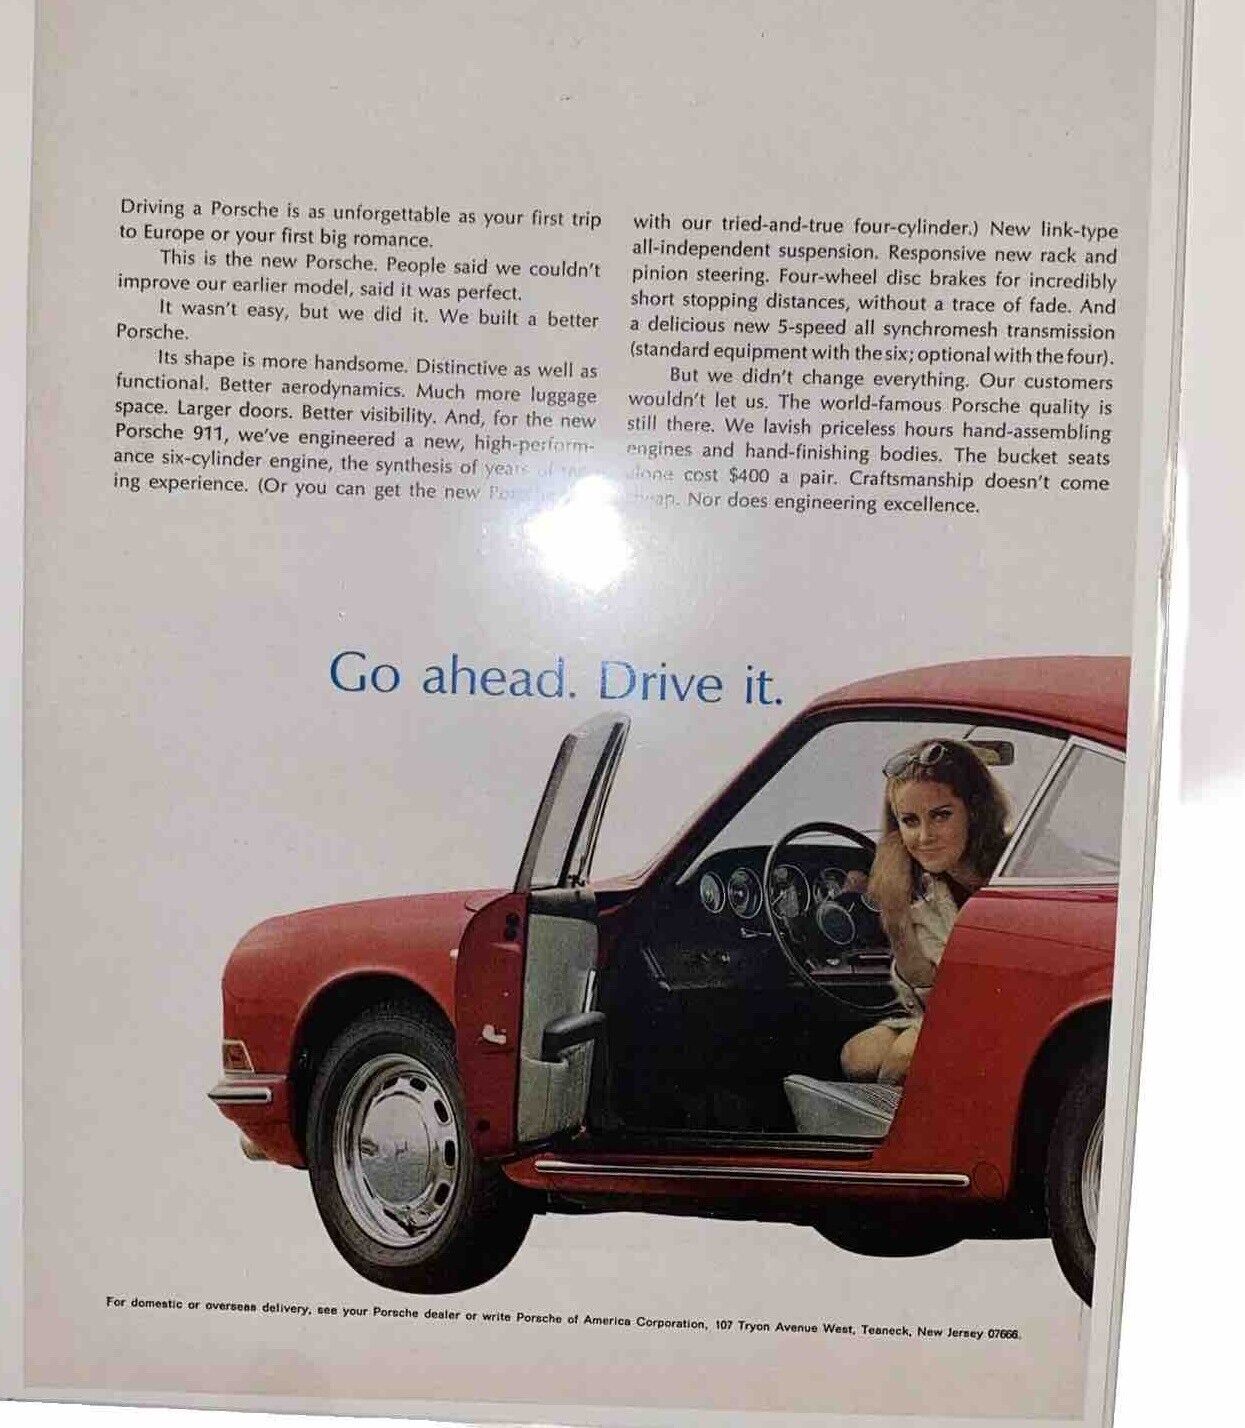 1966 Porsche 911 red car photo vintage print ad You’ll Never Forget It. European